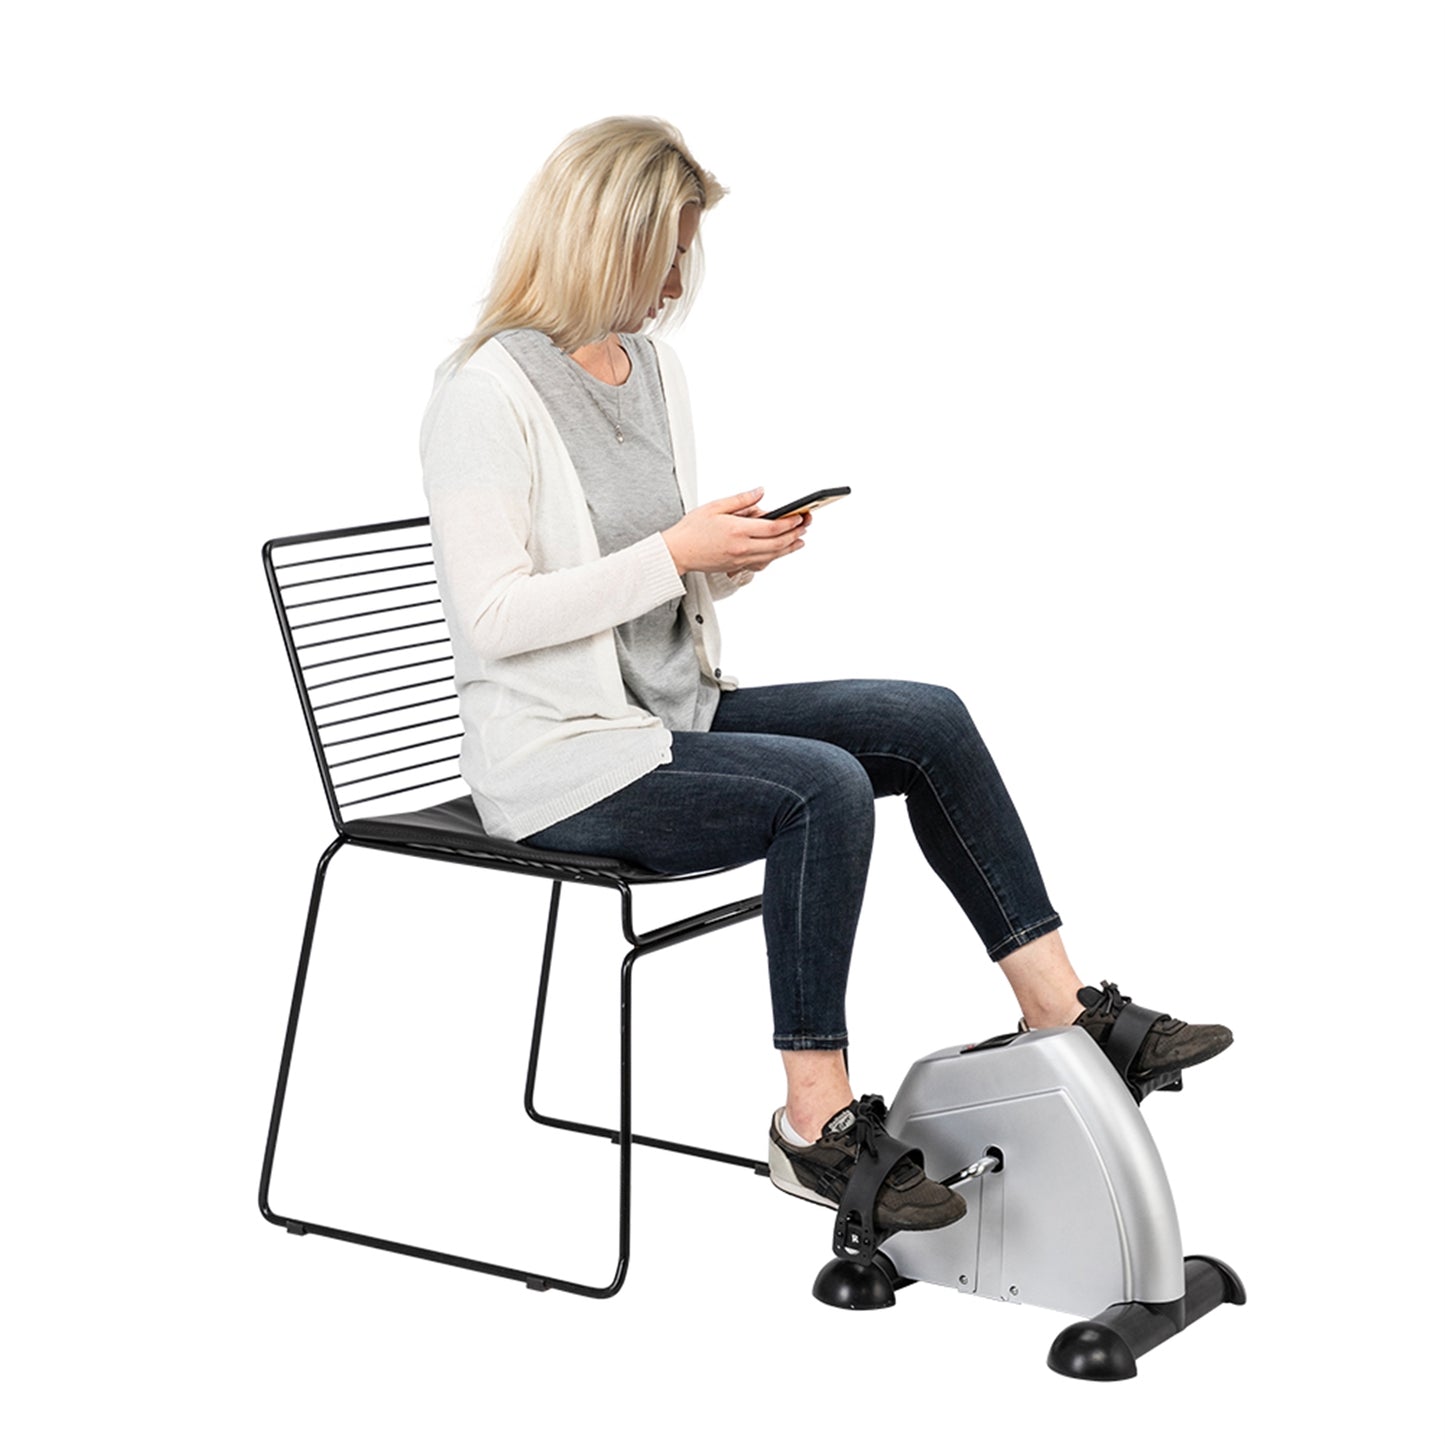 Home Use Hands and Feet Trainer Mini Exercise Bike for Home Office